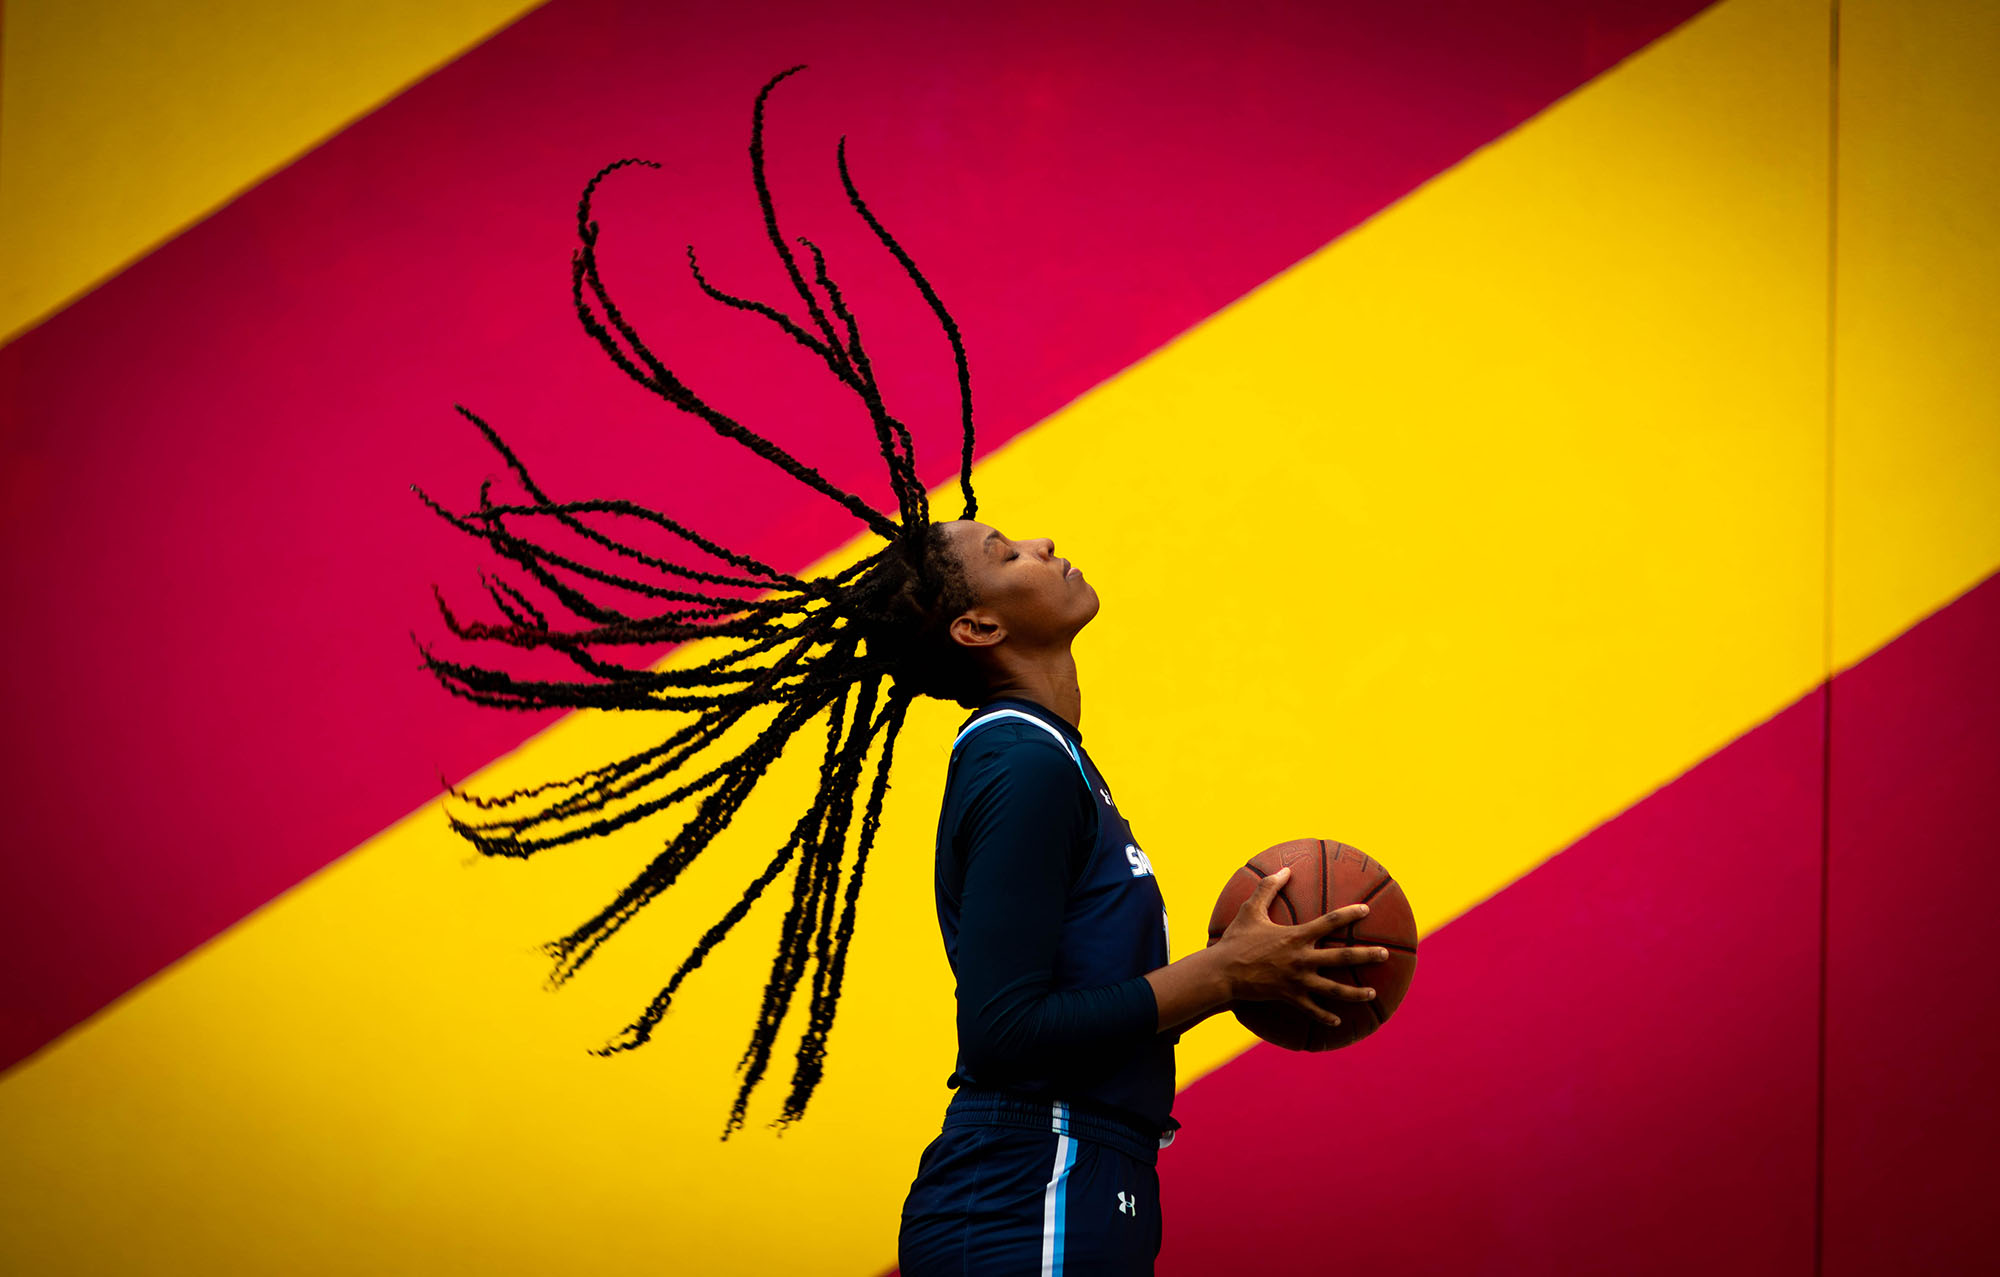 Santa Fe College Women’s Basketball player Olivia Smith taken on Sept. 17, 2021 in Gainesville , FL. (Photo by Matt Stamey/Santa Fe College) ***Subjects have Signed Photo Releases***